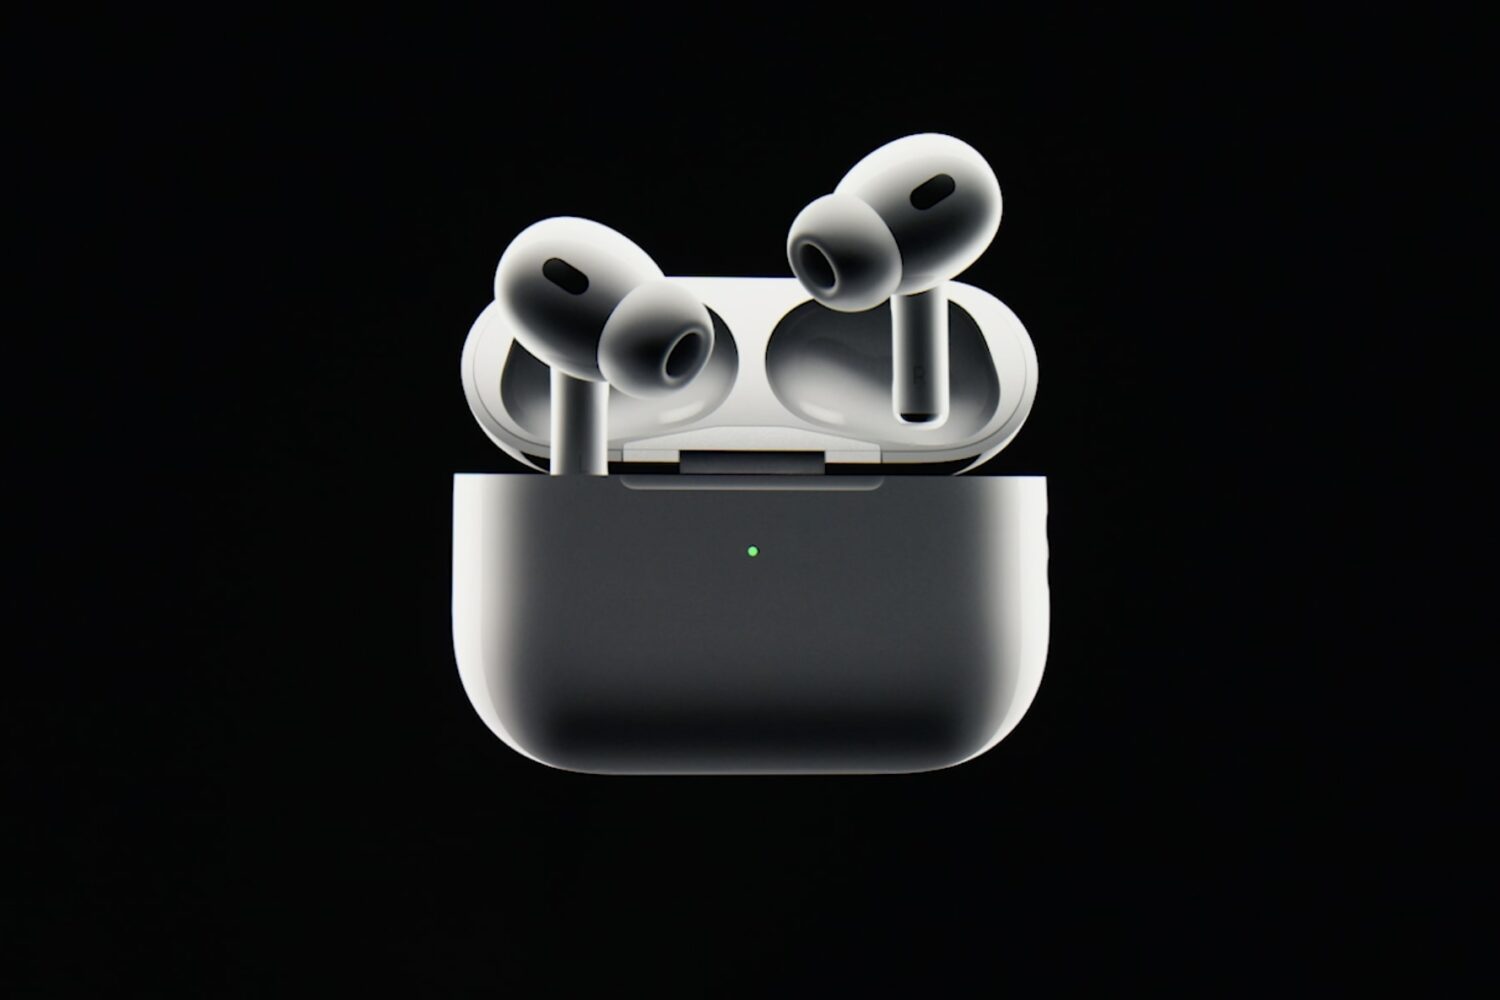 AirPods Pro in their charging case with the lid open, set against a solid black background